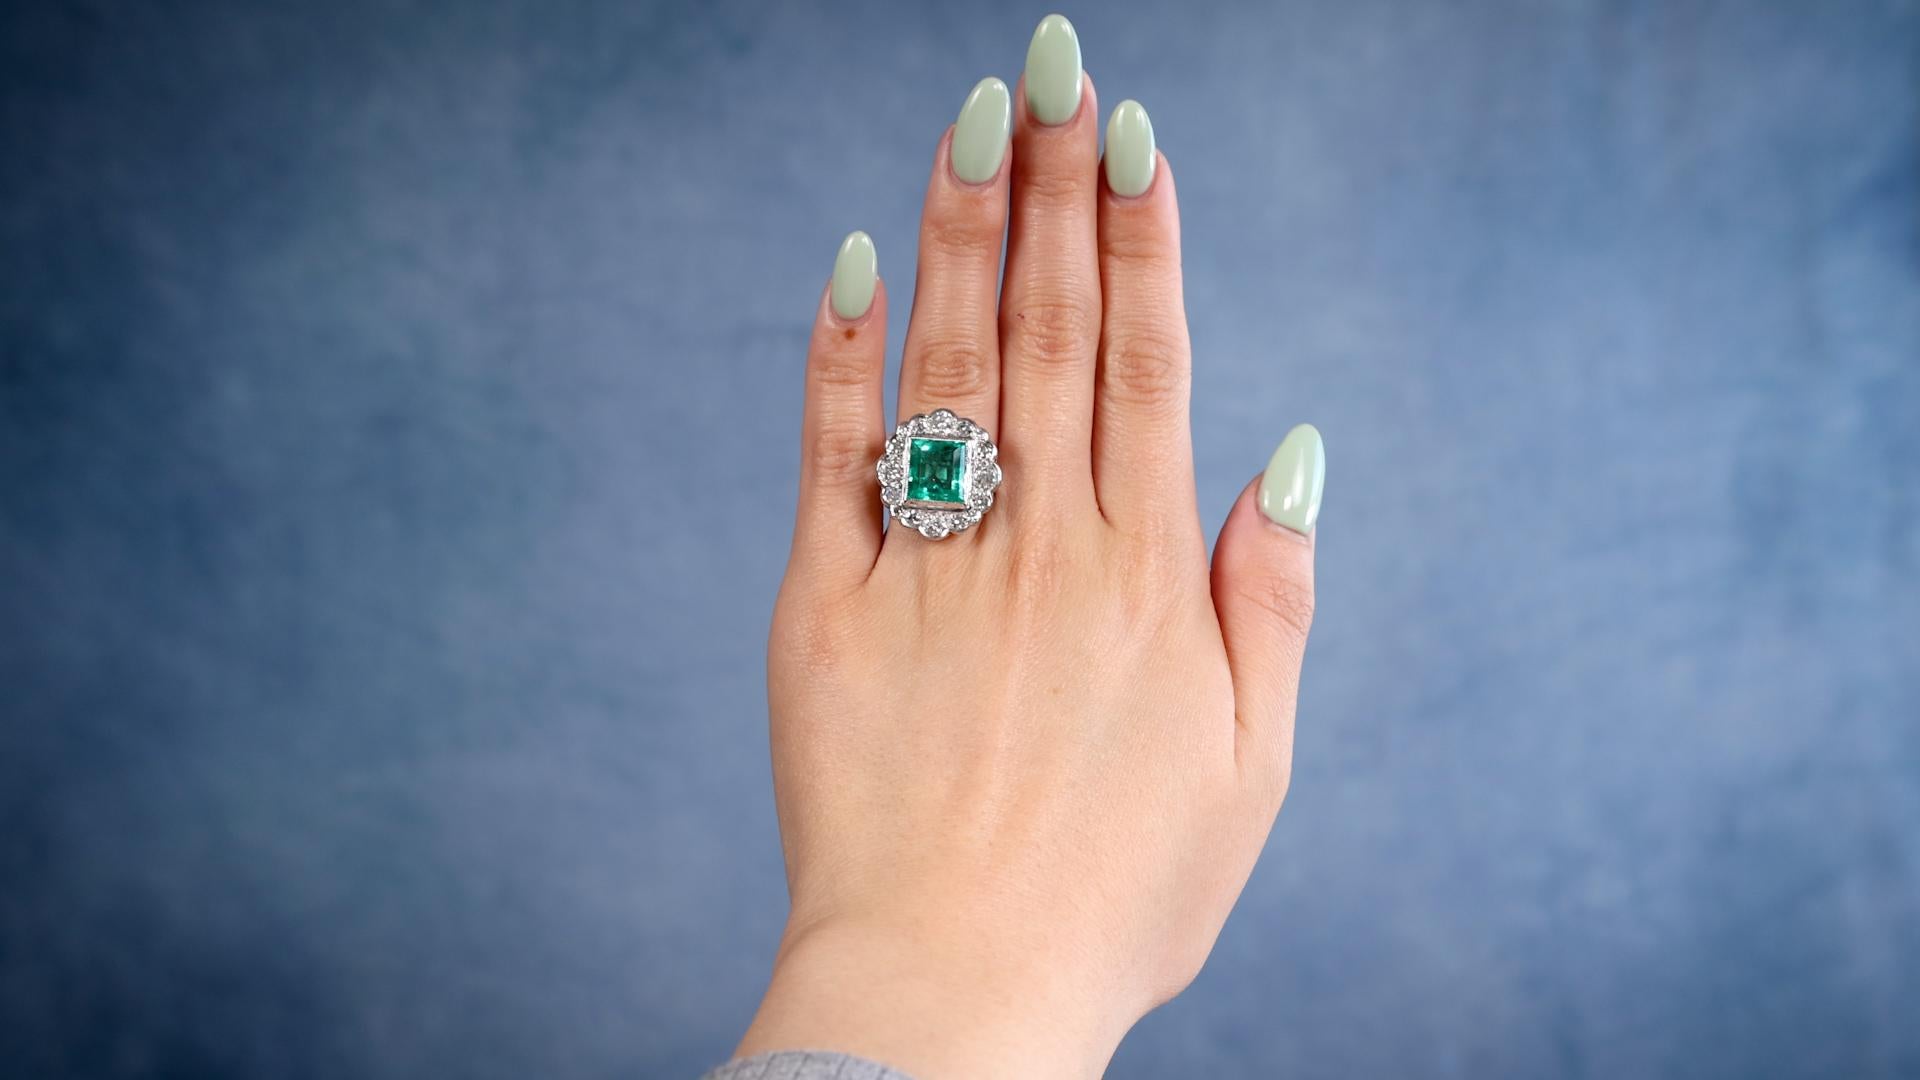 One Art Deco GIA 4.00 Carat Colombian Emerald Diamond Platinum Cluster Ring. Featuring one GIA rectangular step cut emerald weighing approximately 4.00 carats, accompanied by GIA #1236218394 stating the emerald is of Colombian origin. Accented by 16